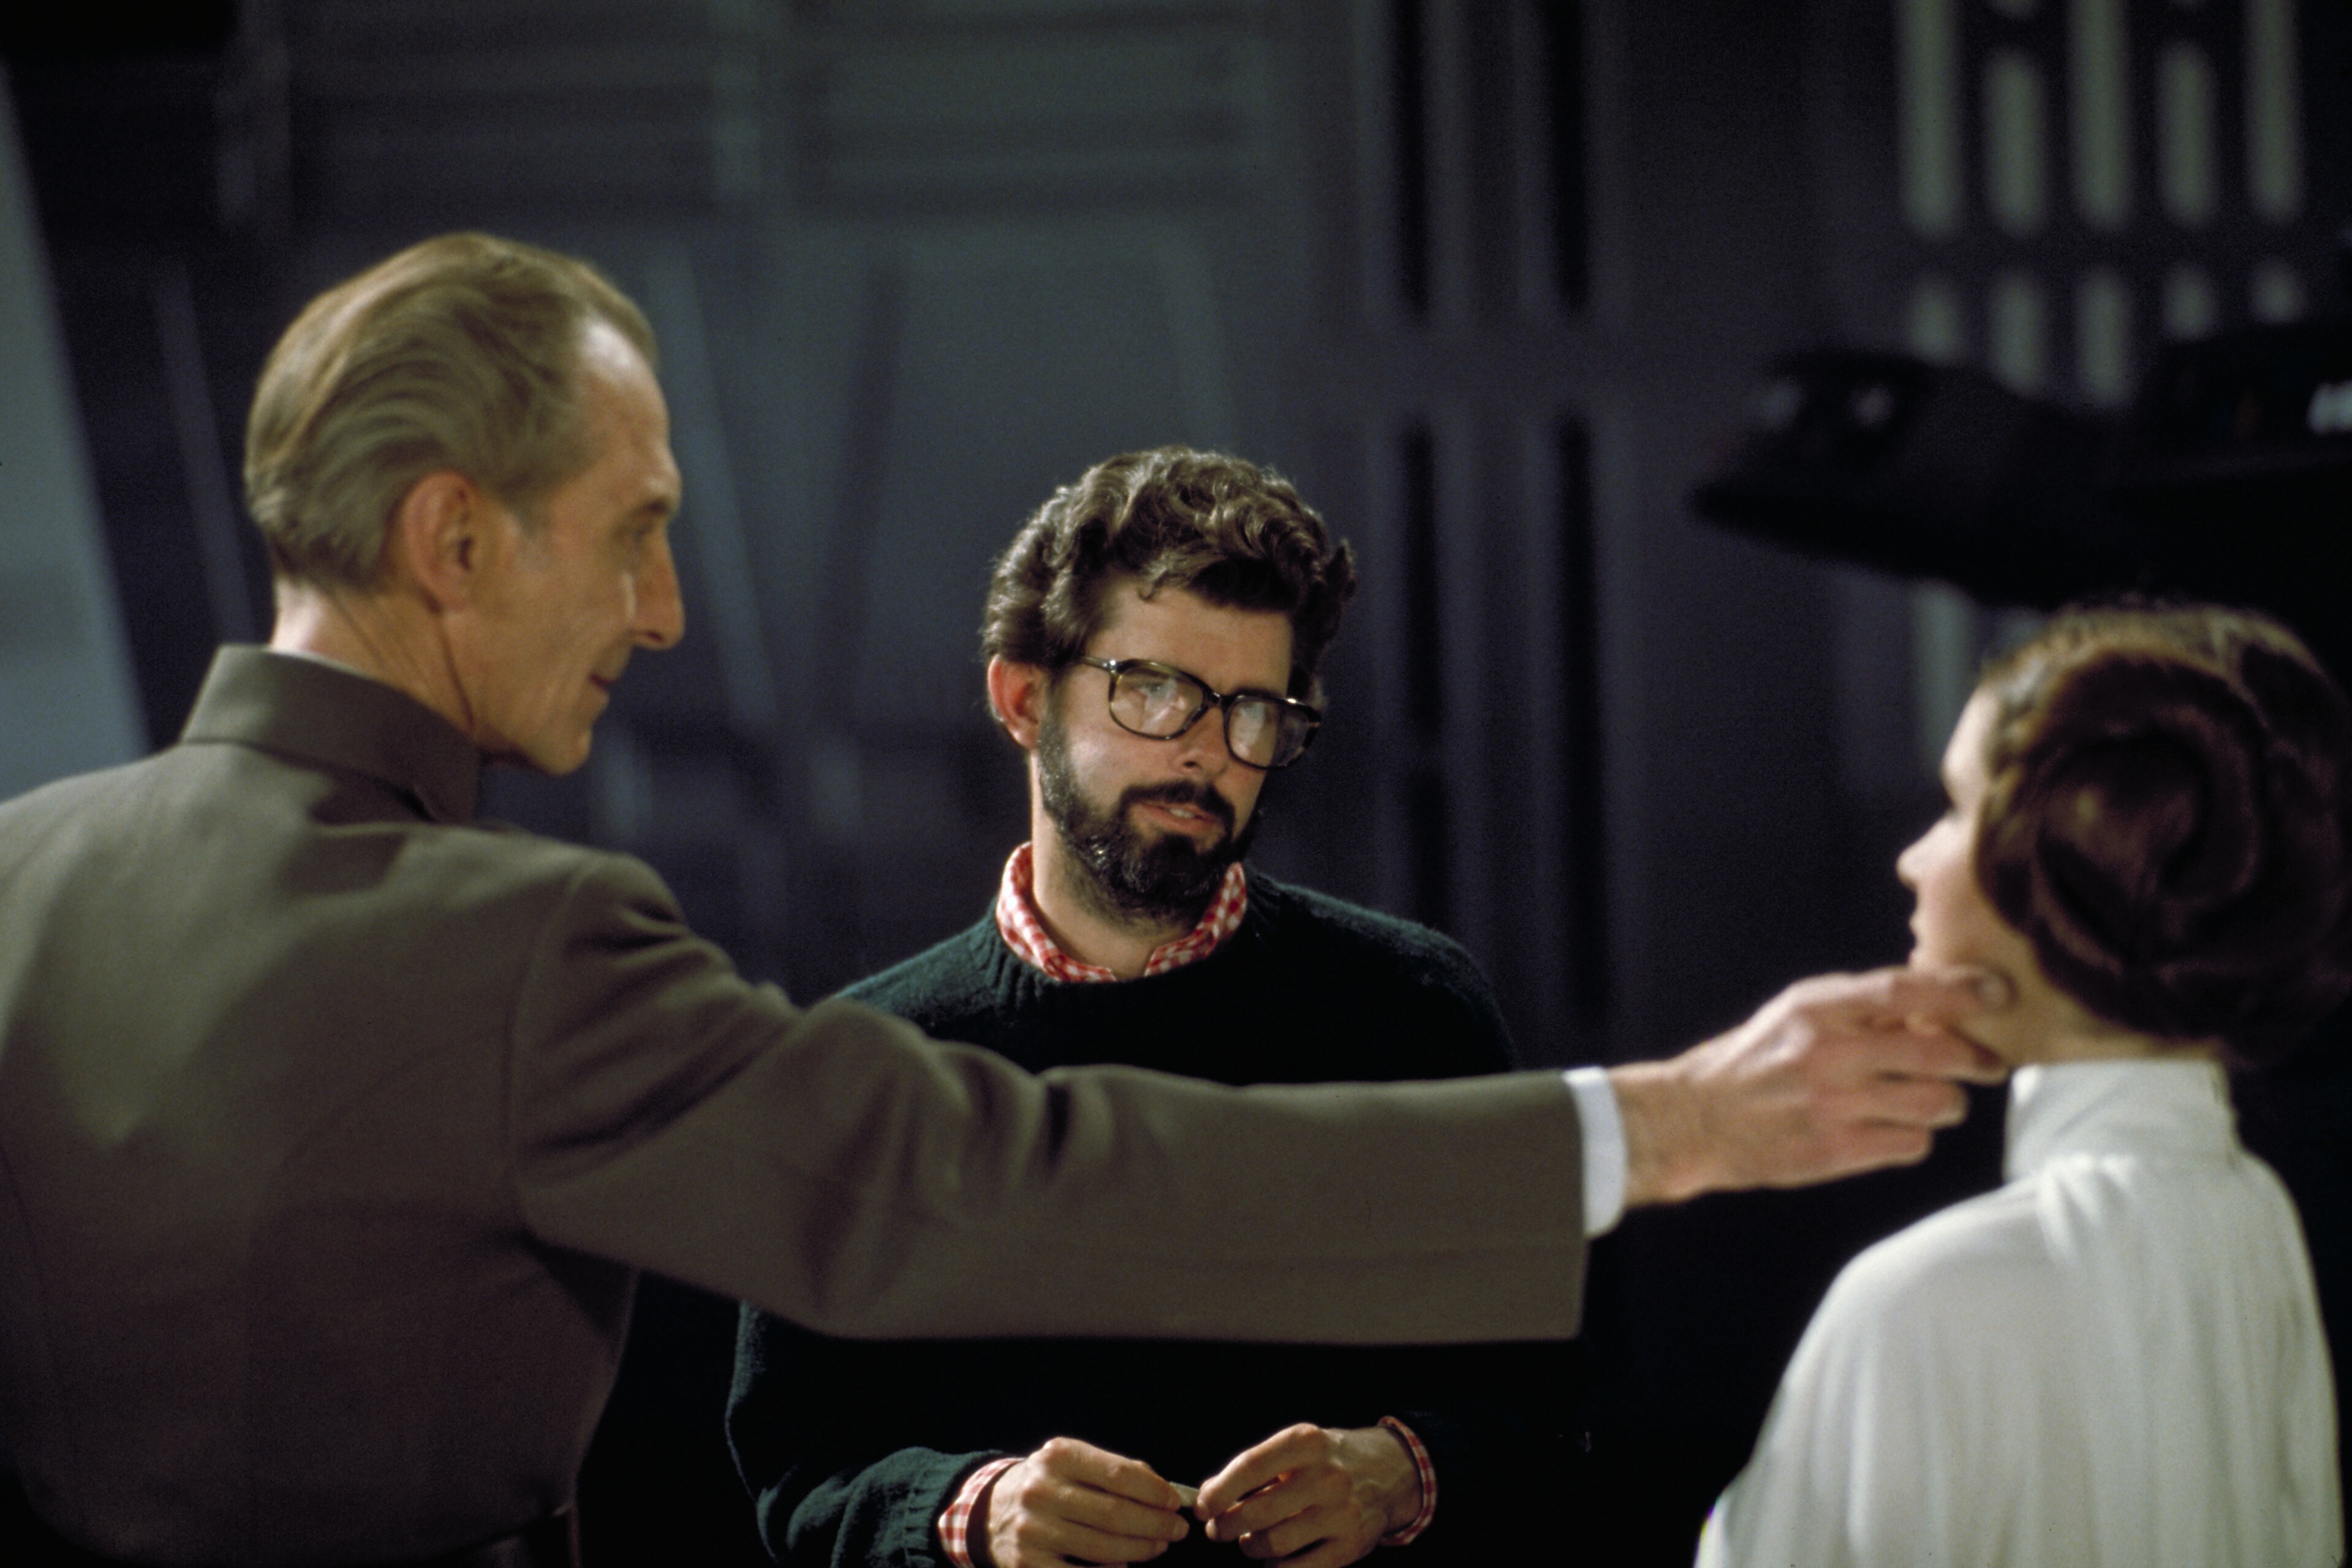 Peter Cushing, George Lucas, and Carrie Fisher on the Death Star set, preparing to film Tarkin's ...